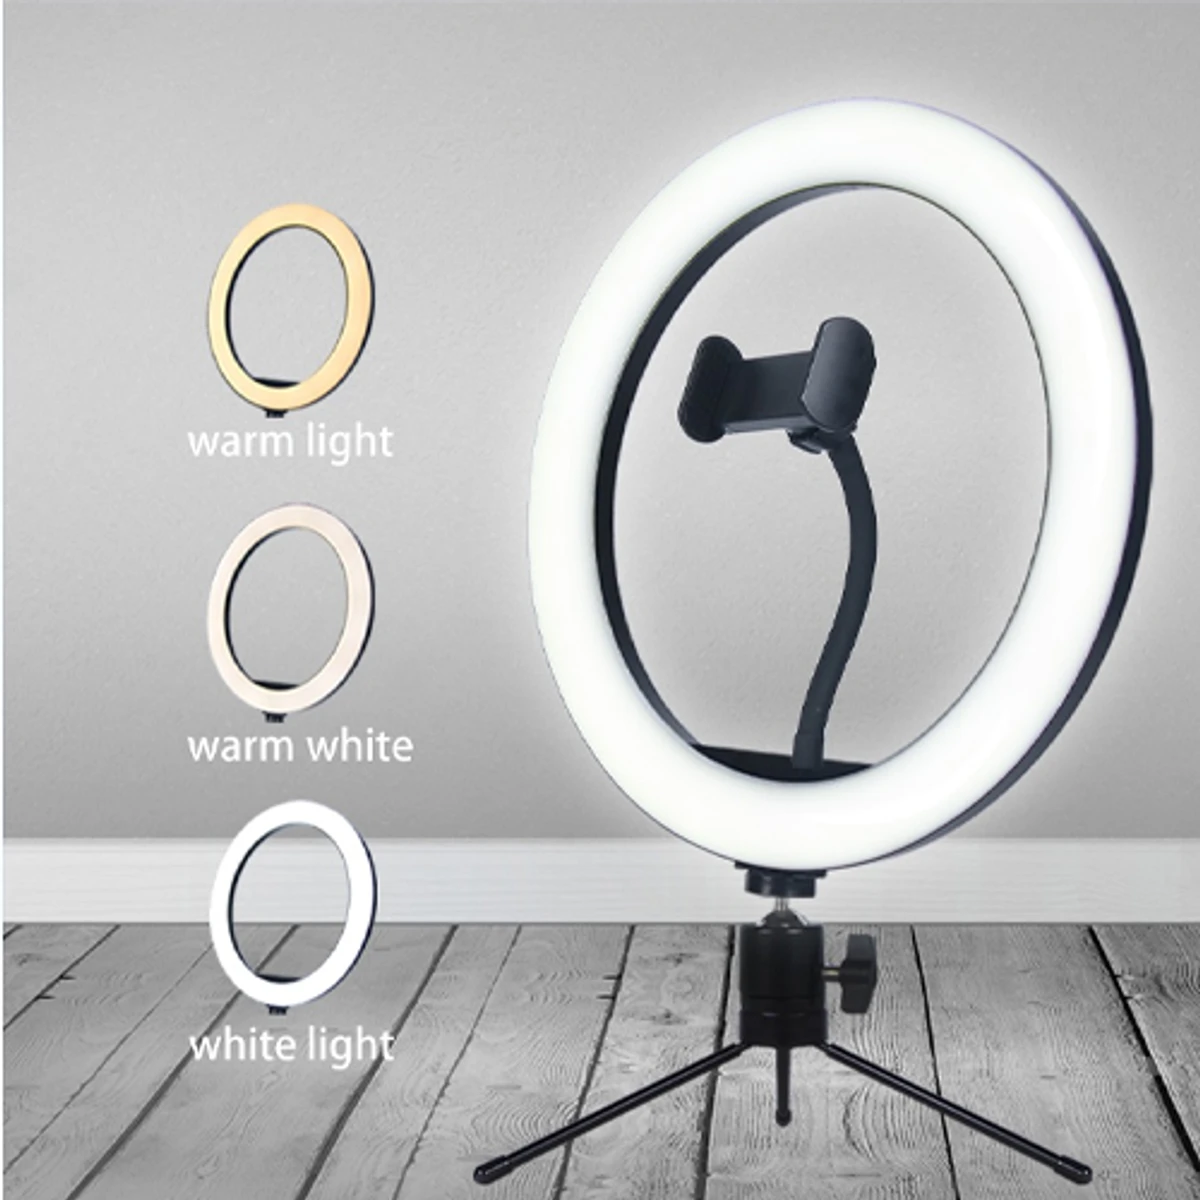 Led Ring Light For Smartphone- Adjustable Brightness (Only 10 Inch Ring Light Without Stand)